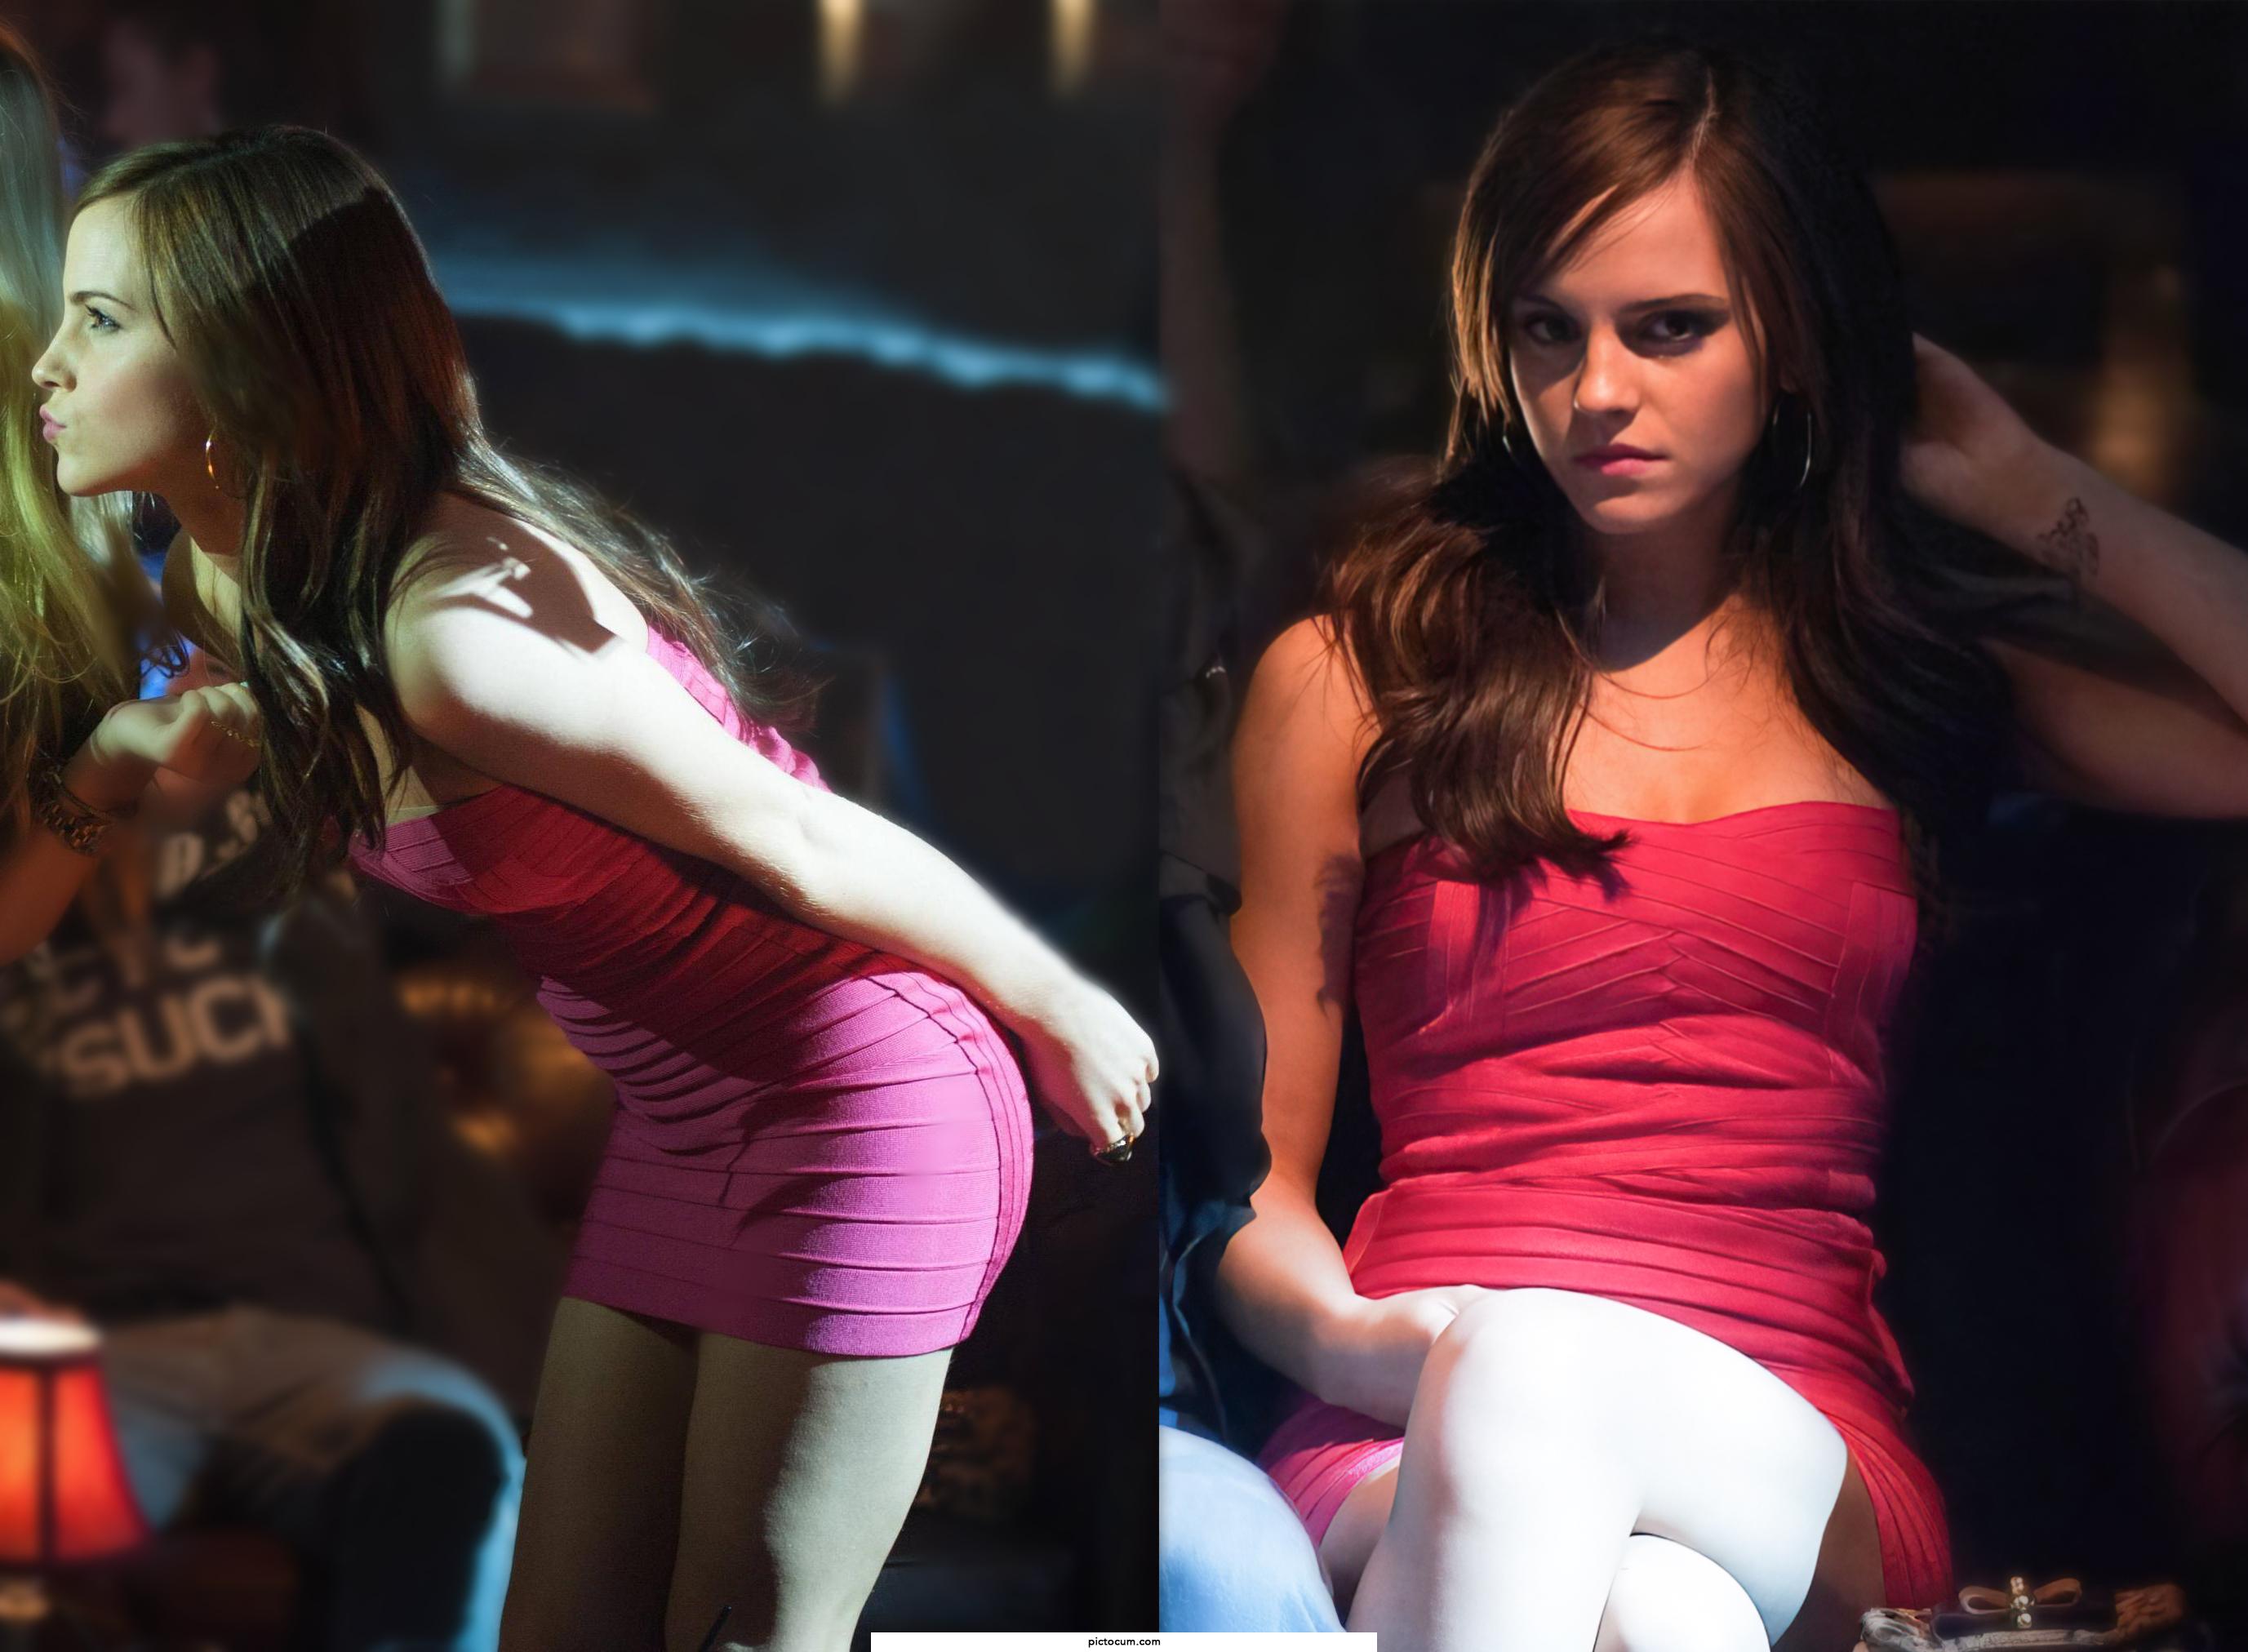 You hit on Emma Watson at the club, what happens when you get home with her?